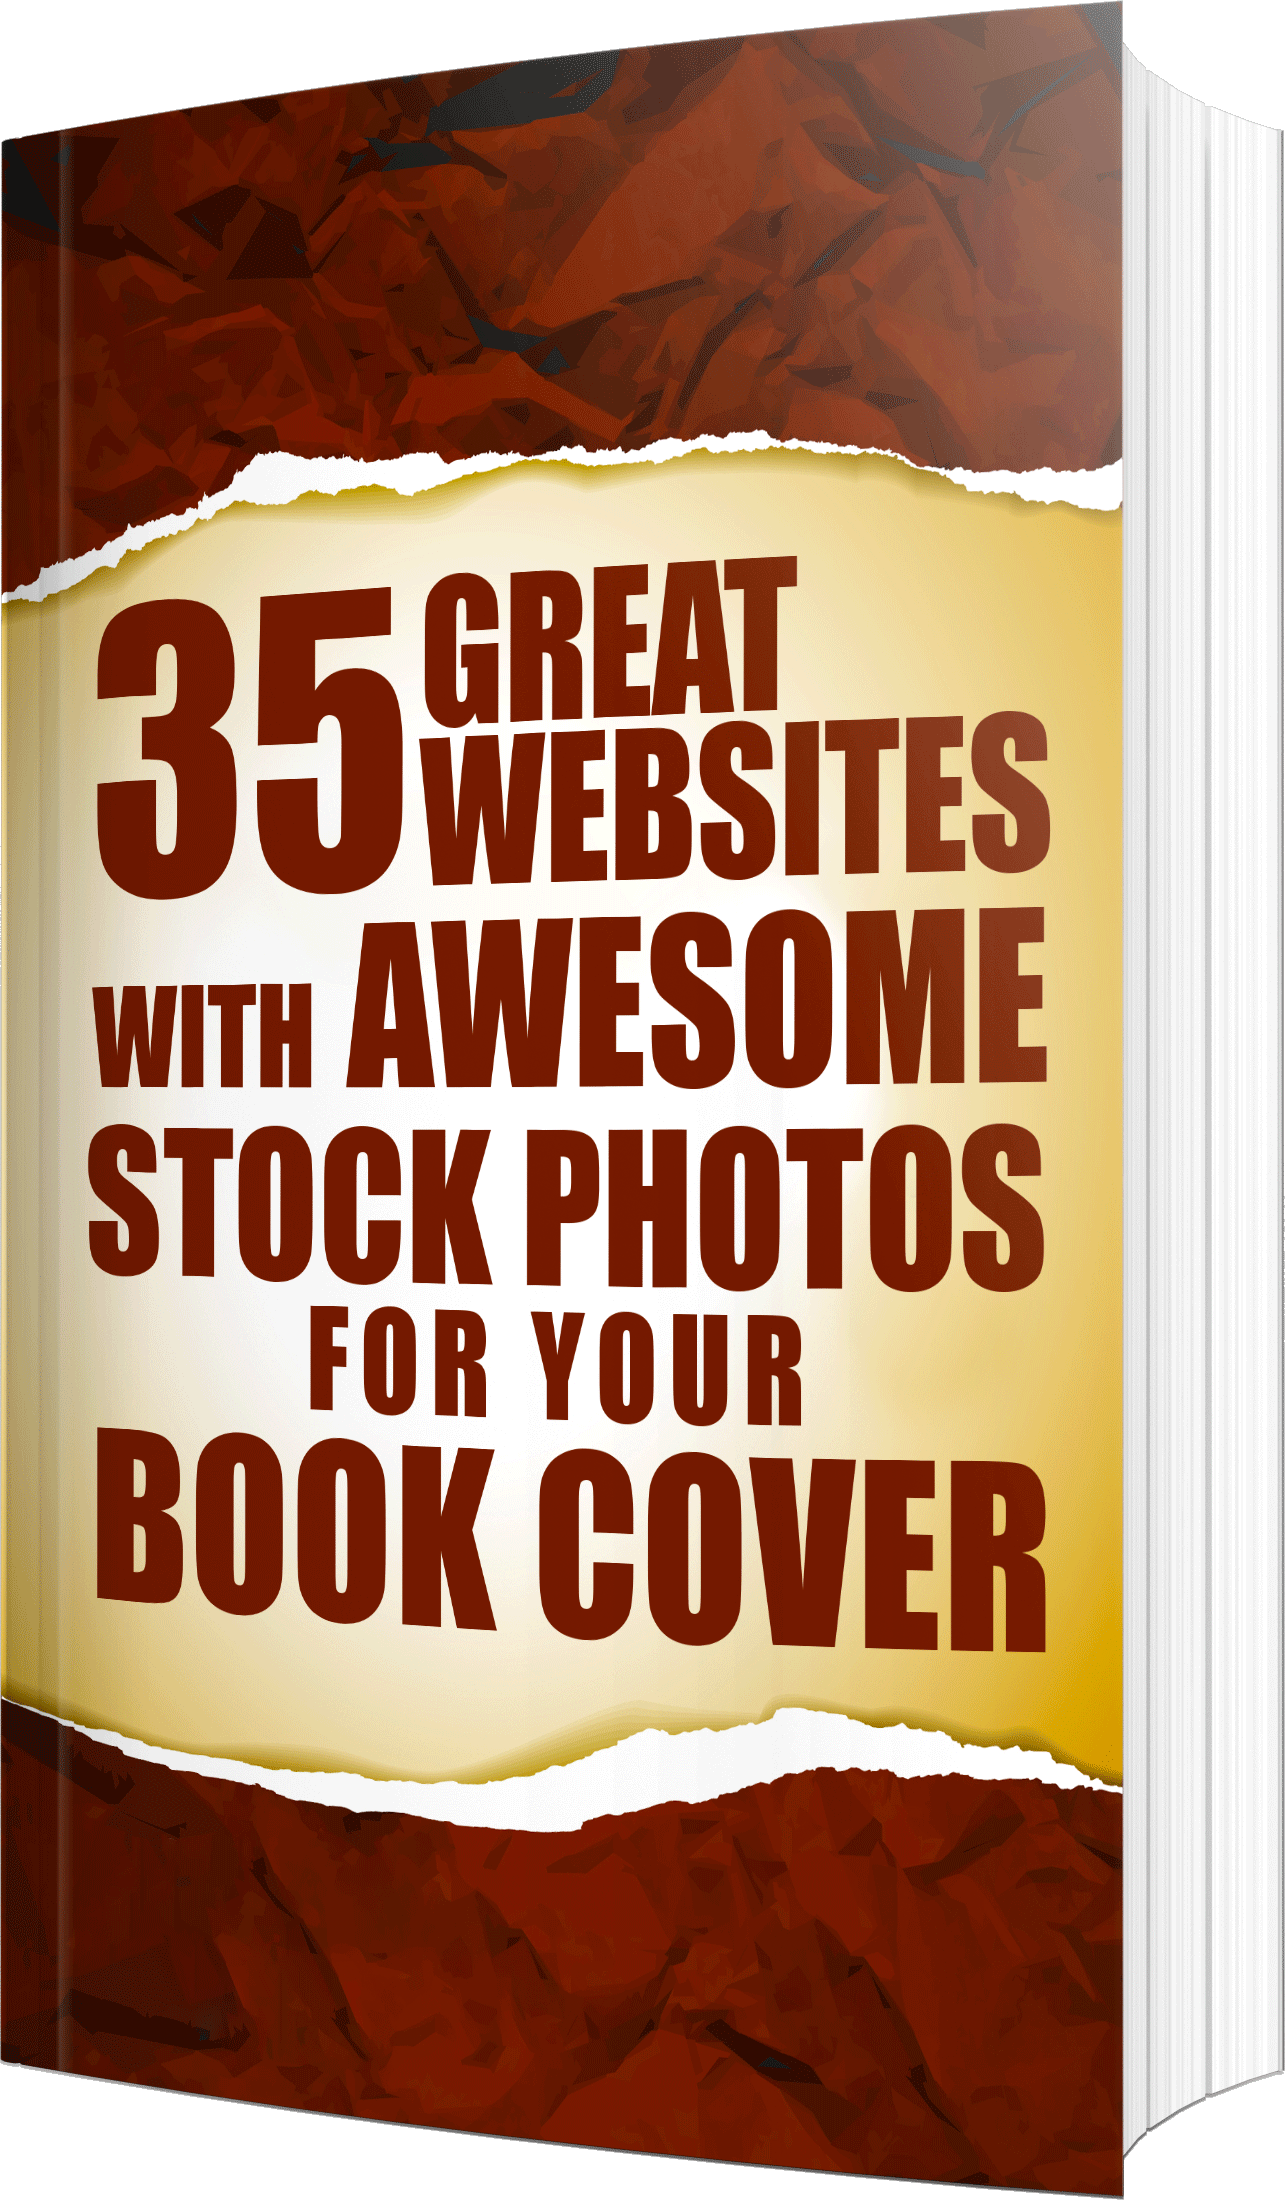 35 Great Websites with Awesome Stock Photos for your Book Cover